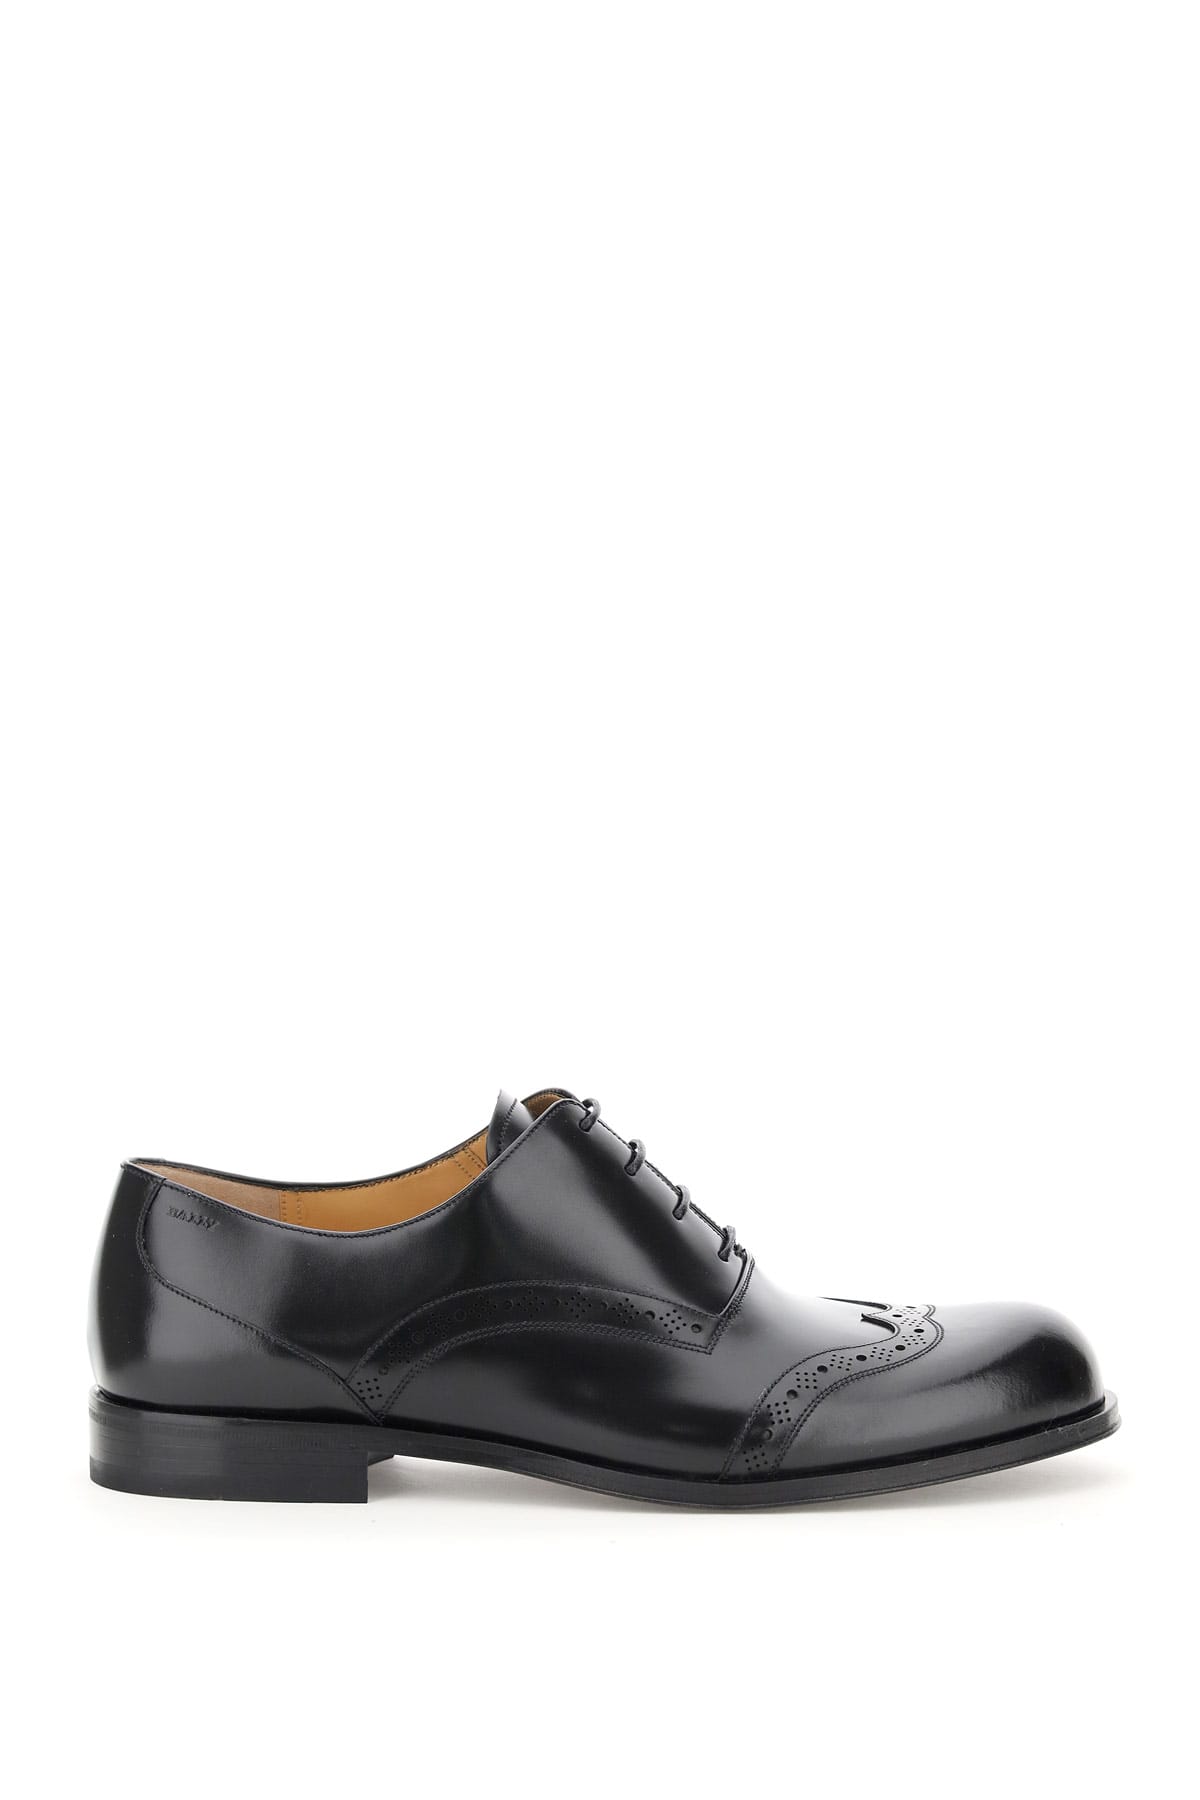 Bally FRENK LACE-UP SHOES